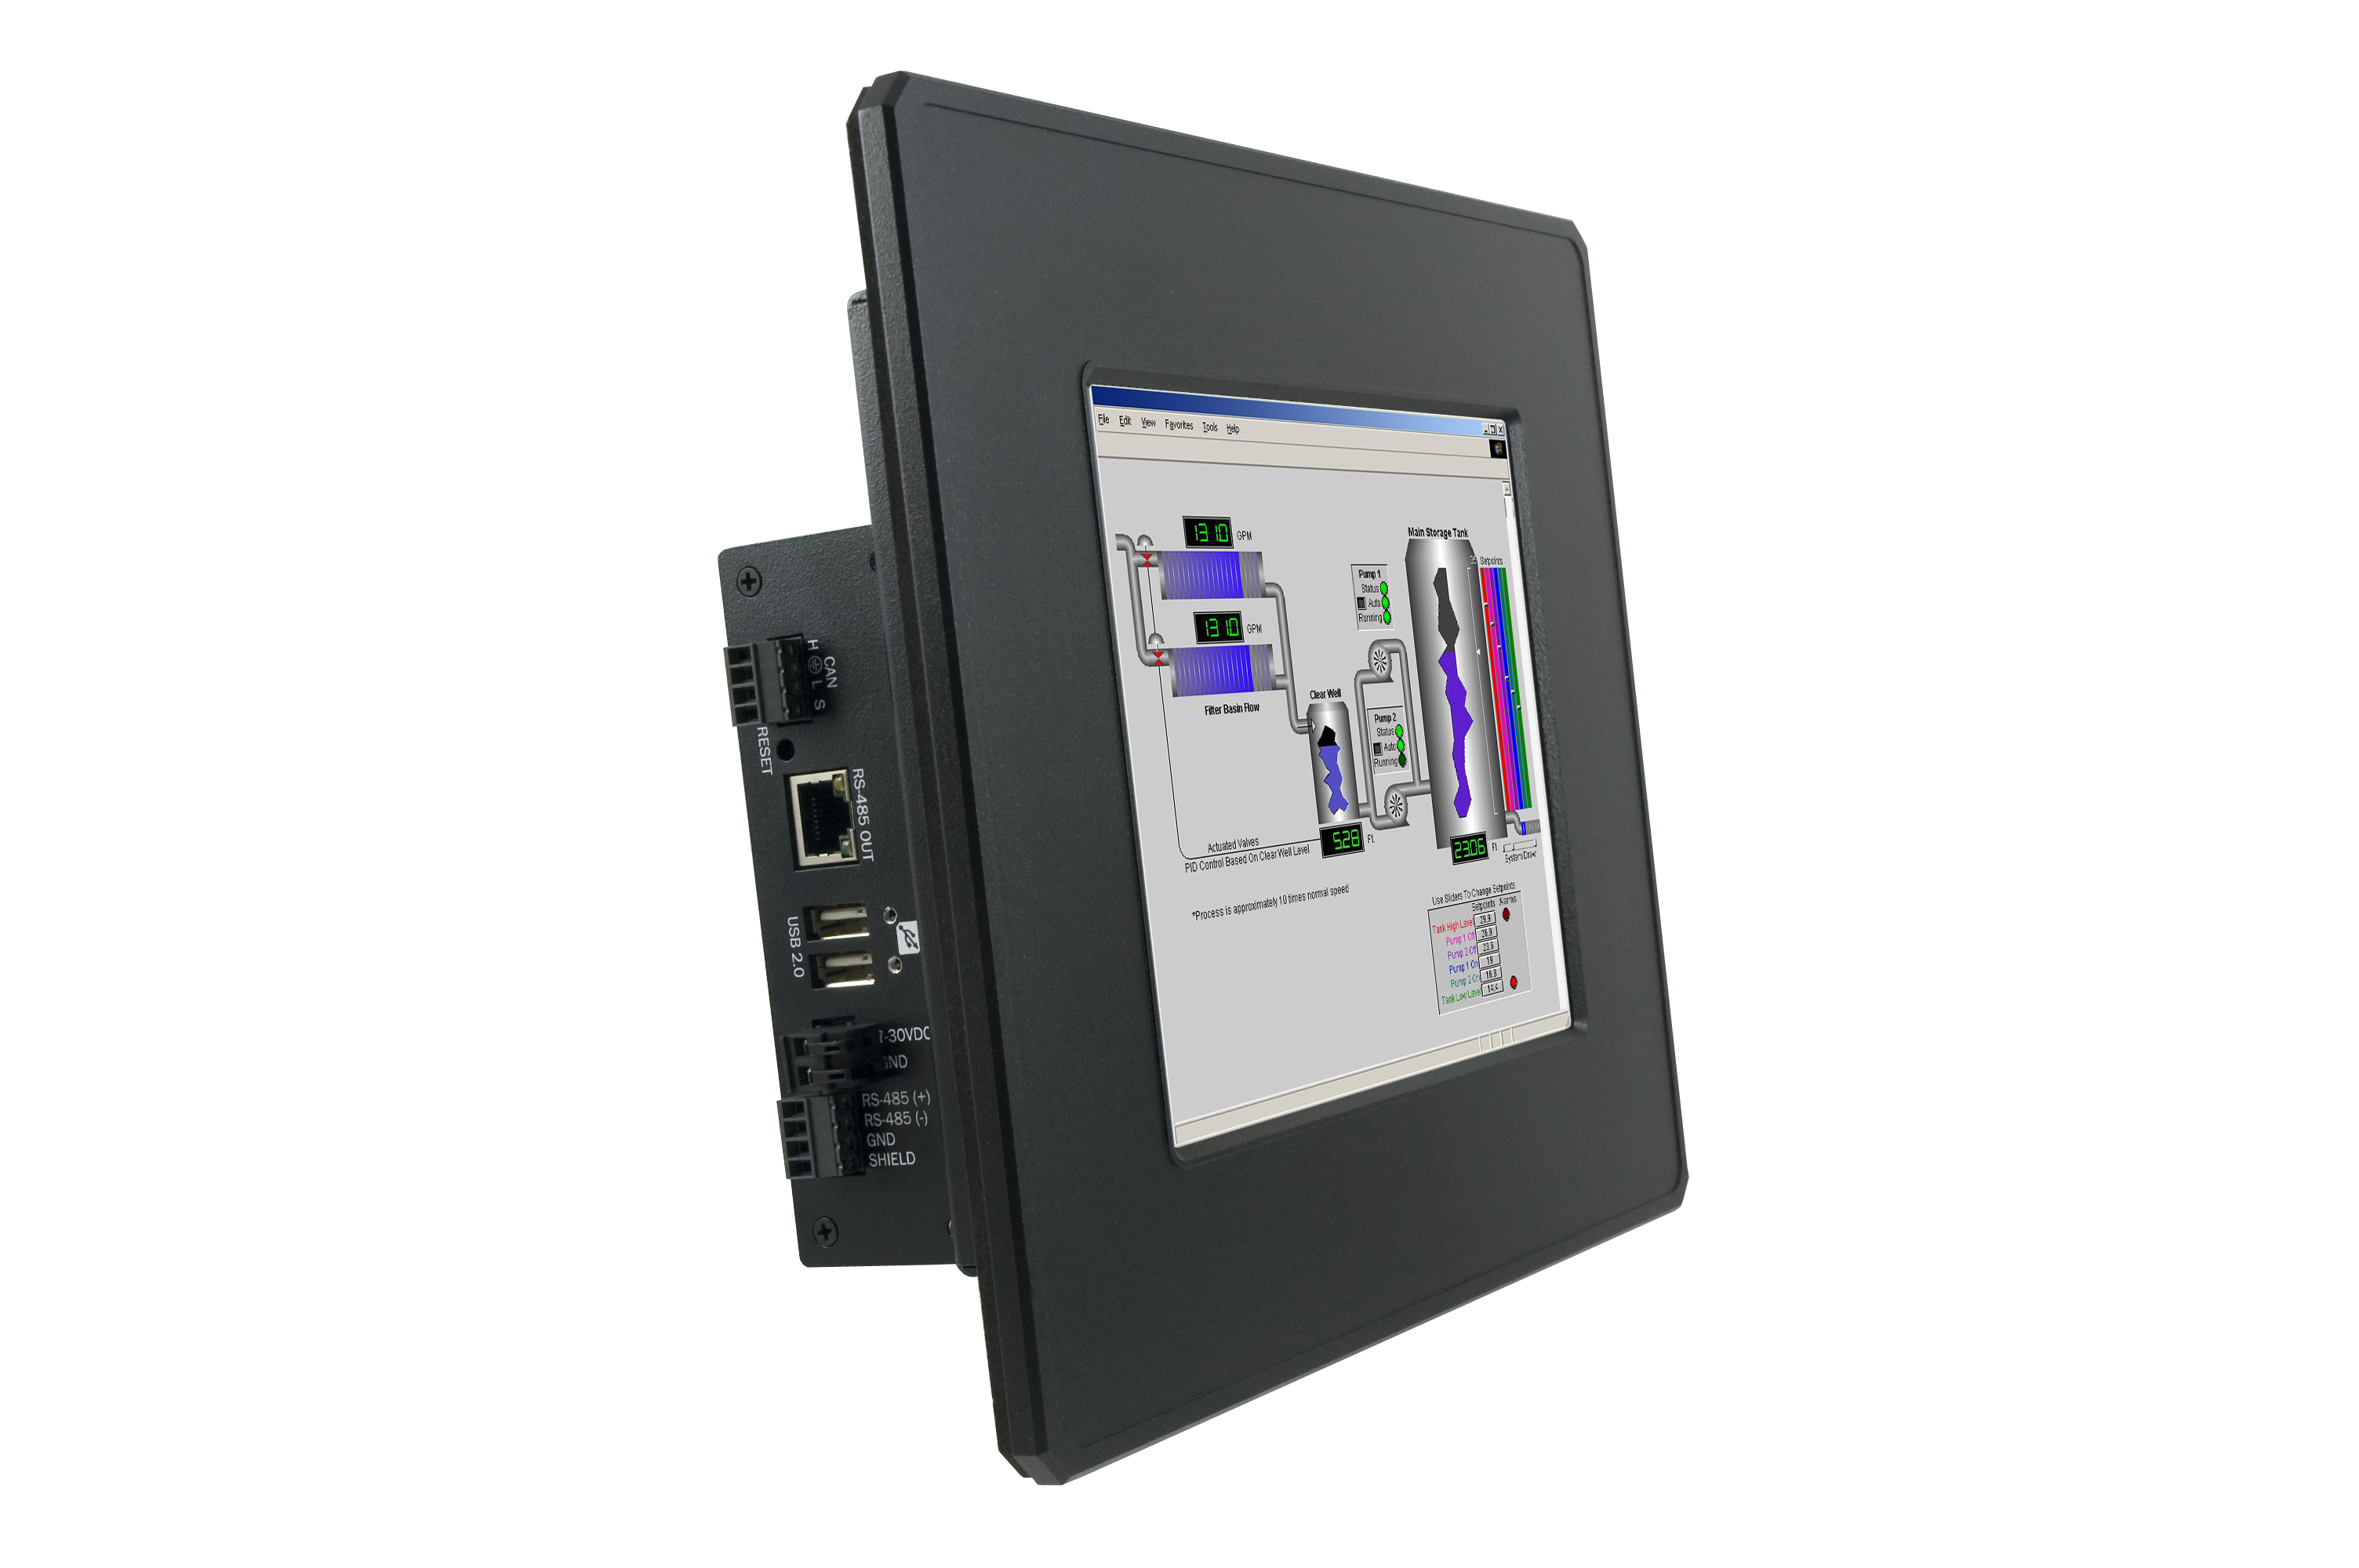 SeaPAC-R9-HAS Embedded Risc Touchscreen Computer